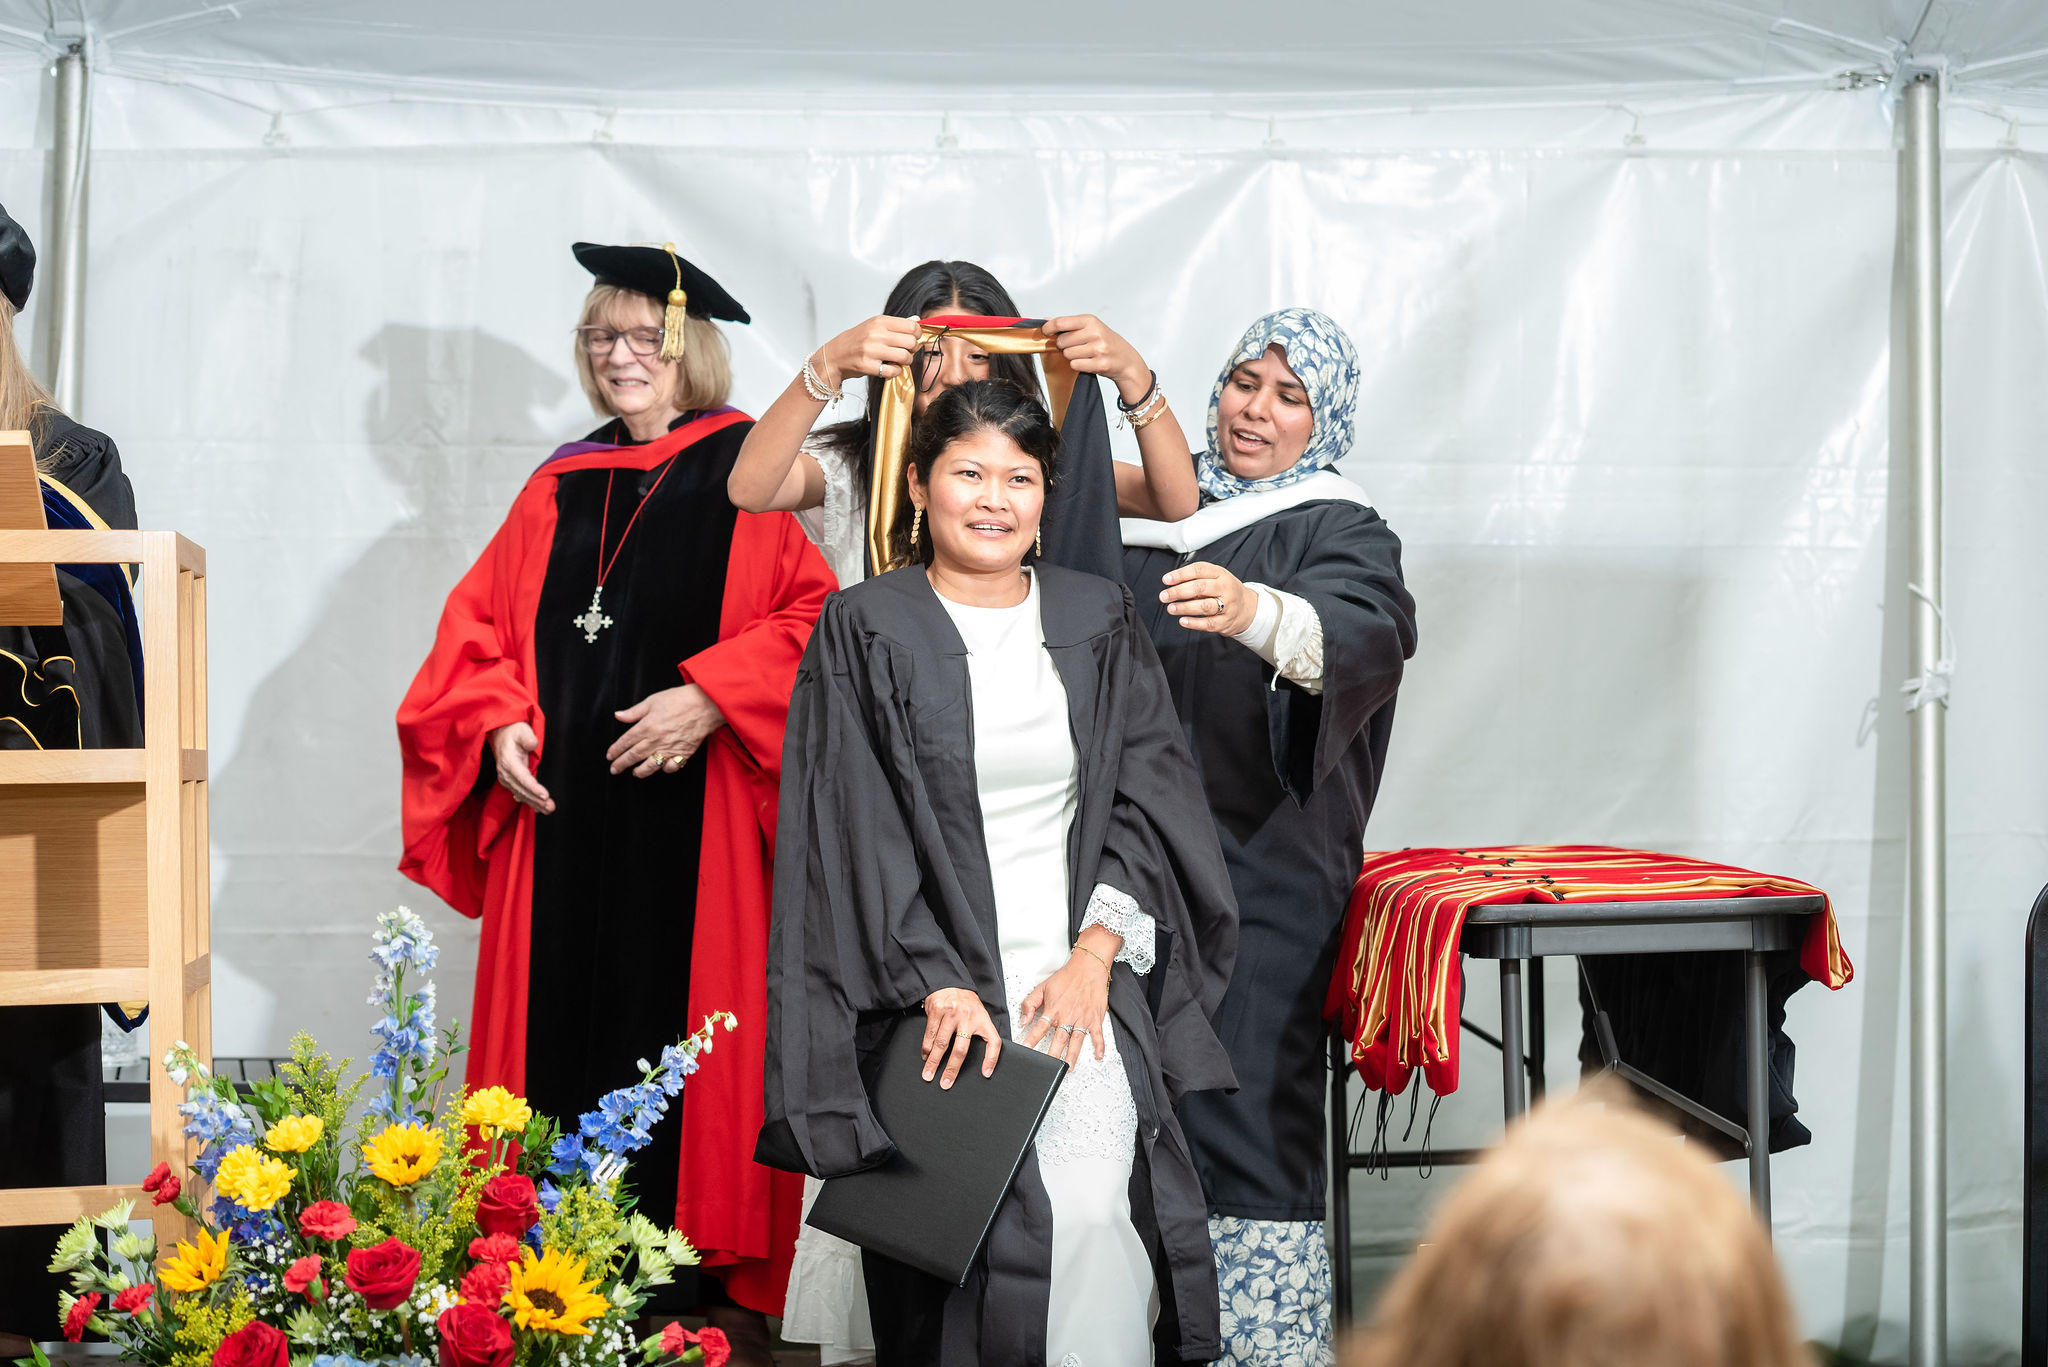 Woman being hooded at graduation